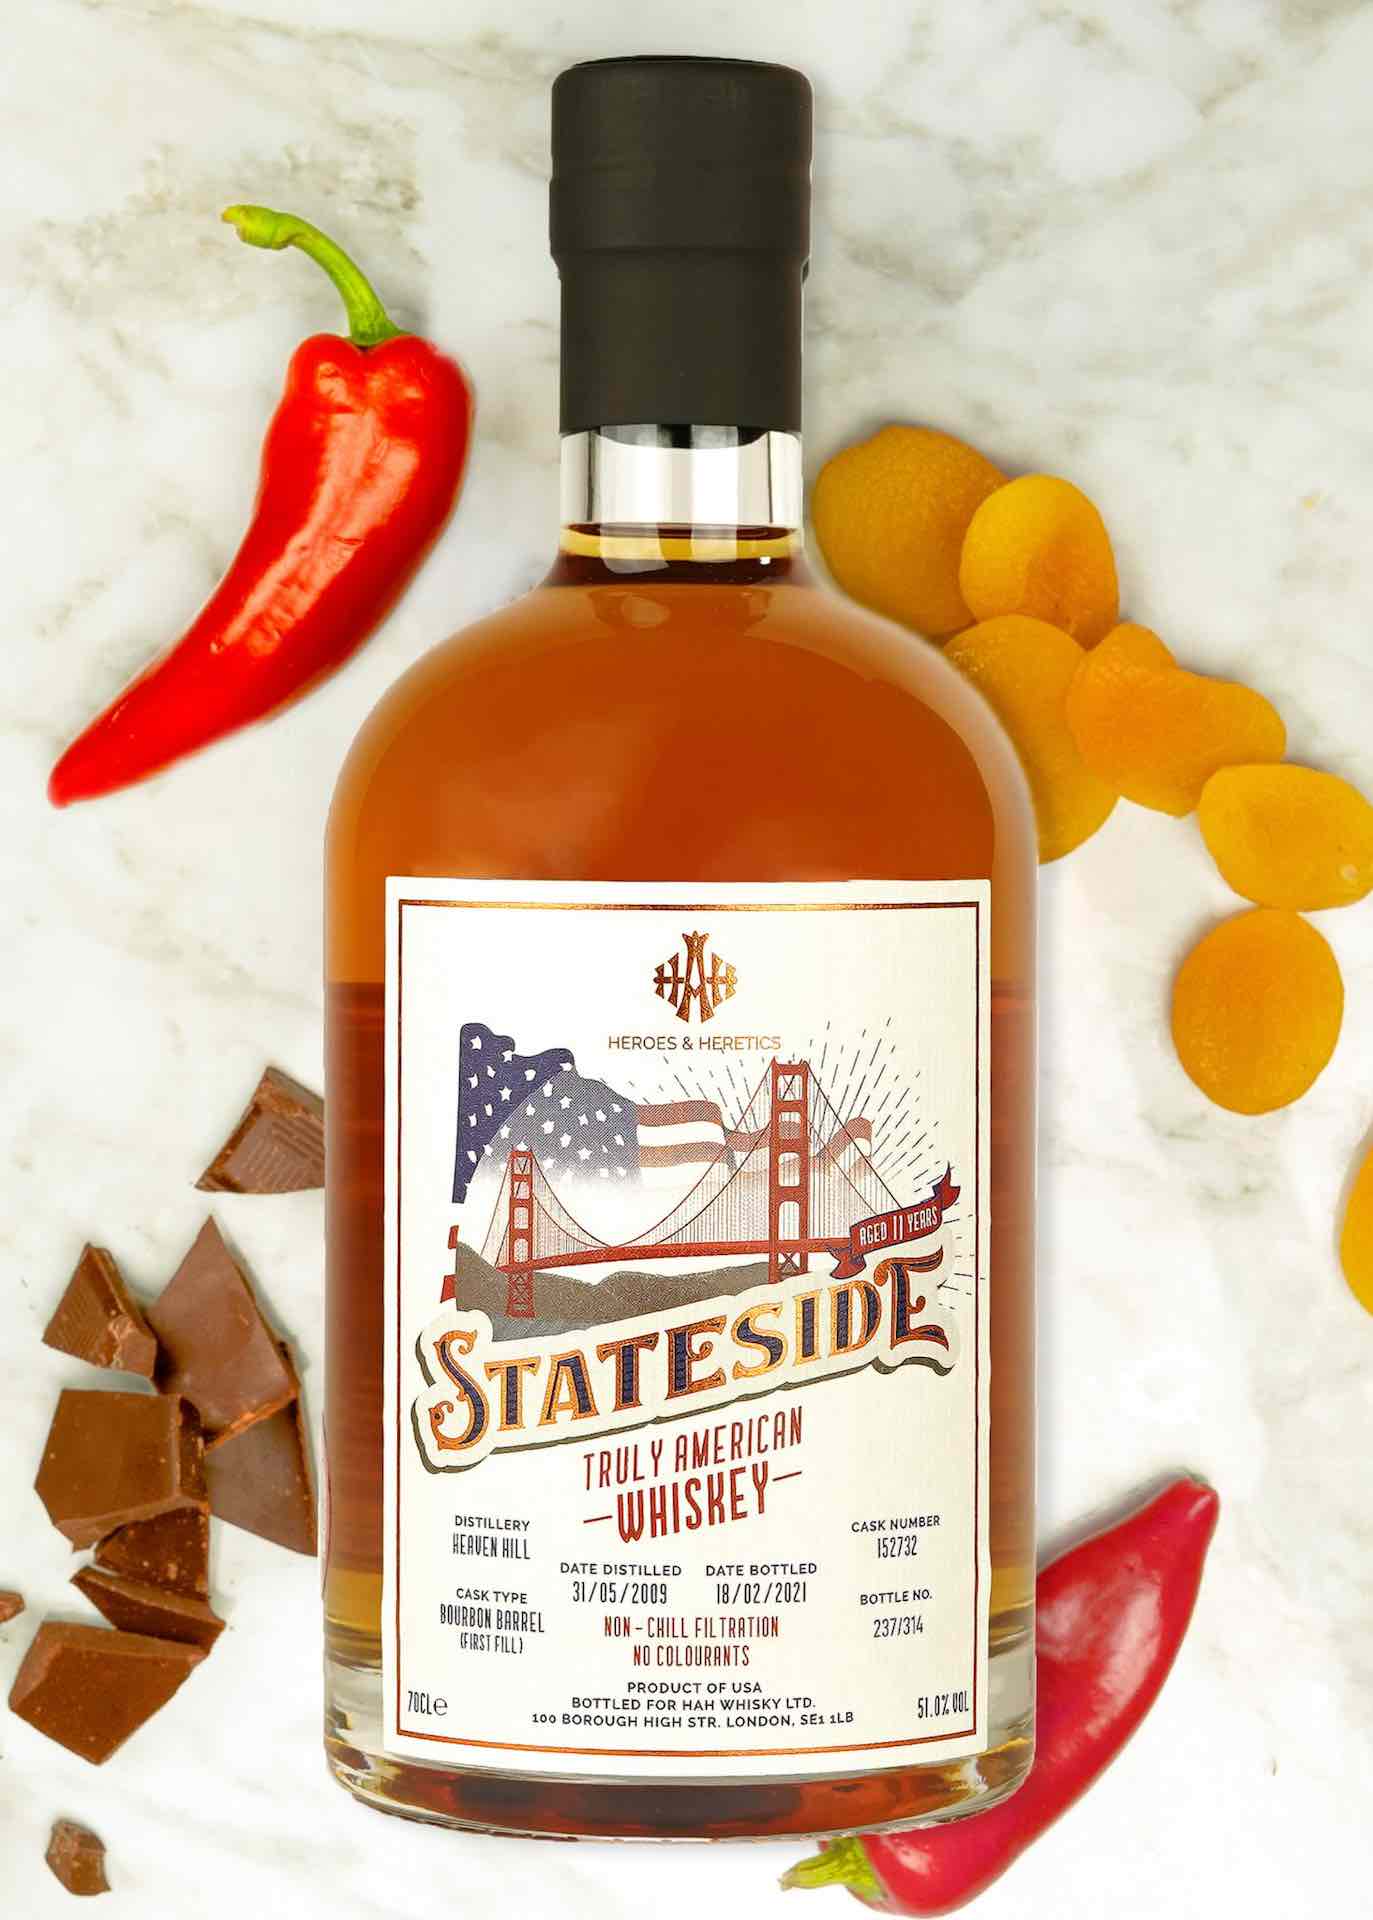 Heroes and Heretics, Stateside Bourbon, Heaven Hill 11 Year Old